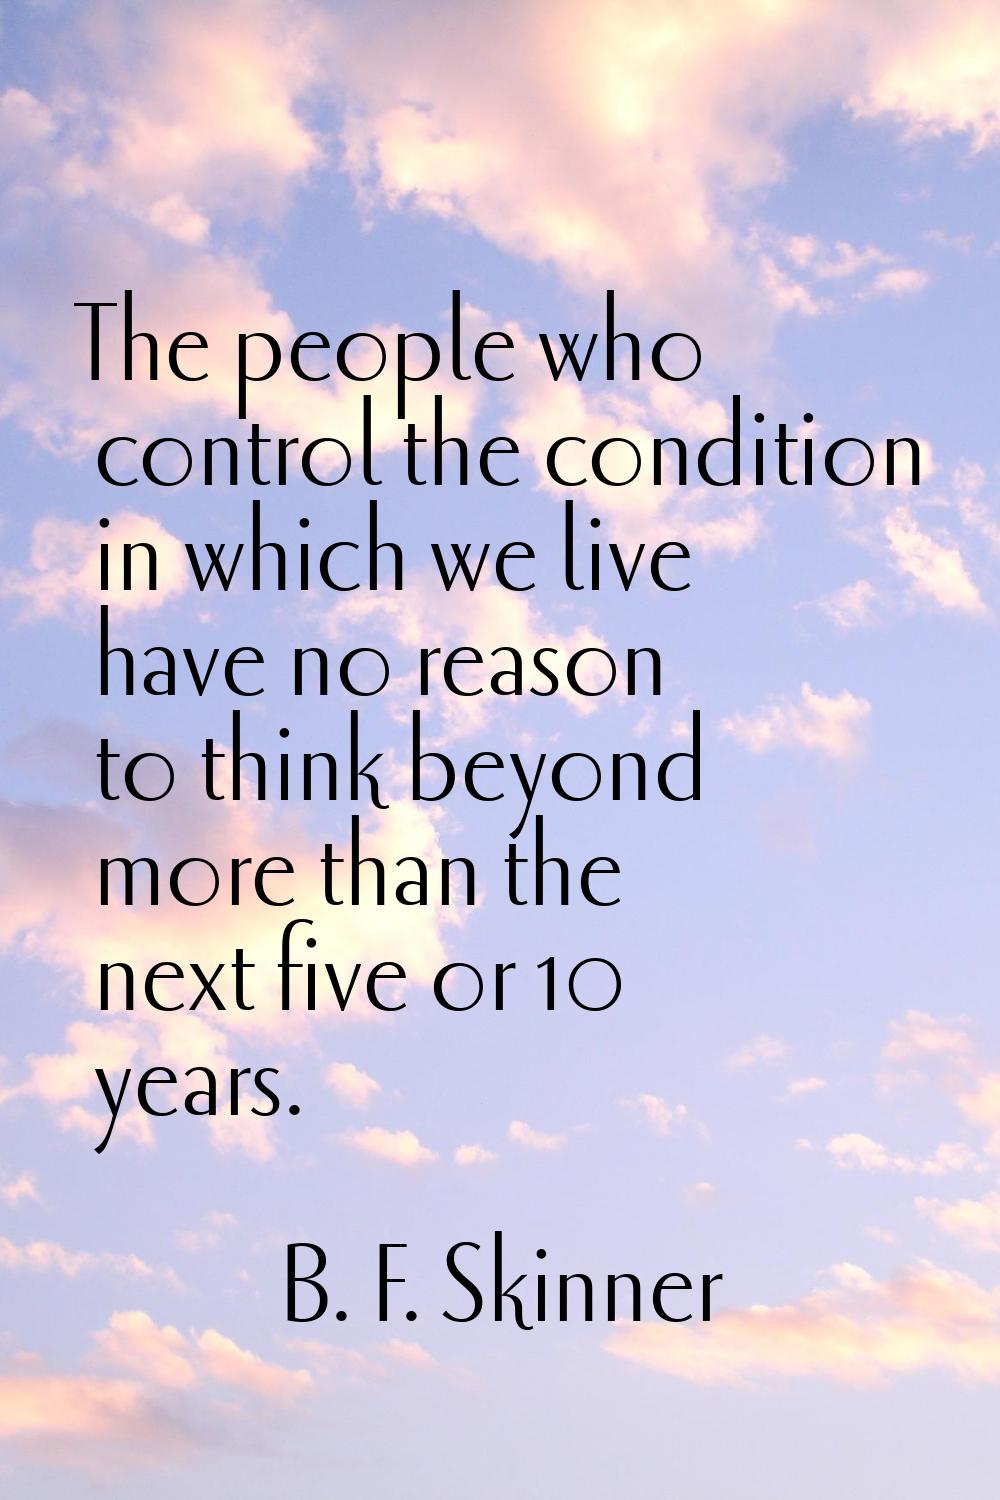 The people who control the condition in which we live have no reason to think beyond more than the 